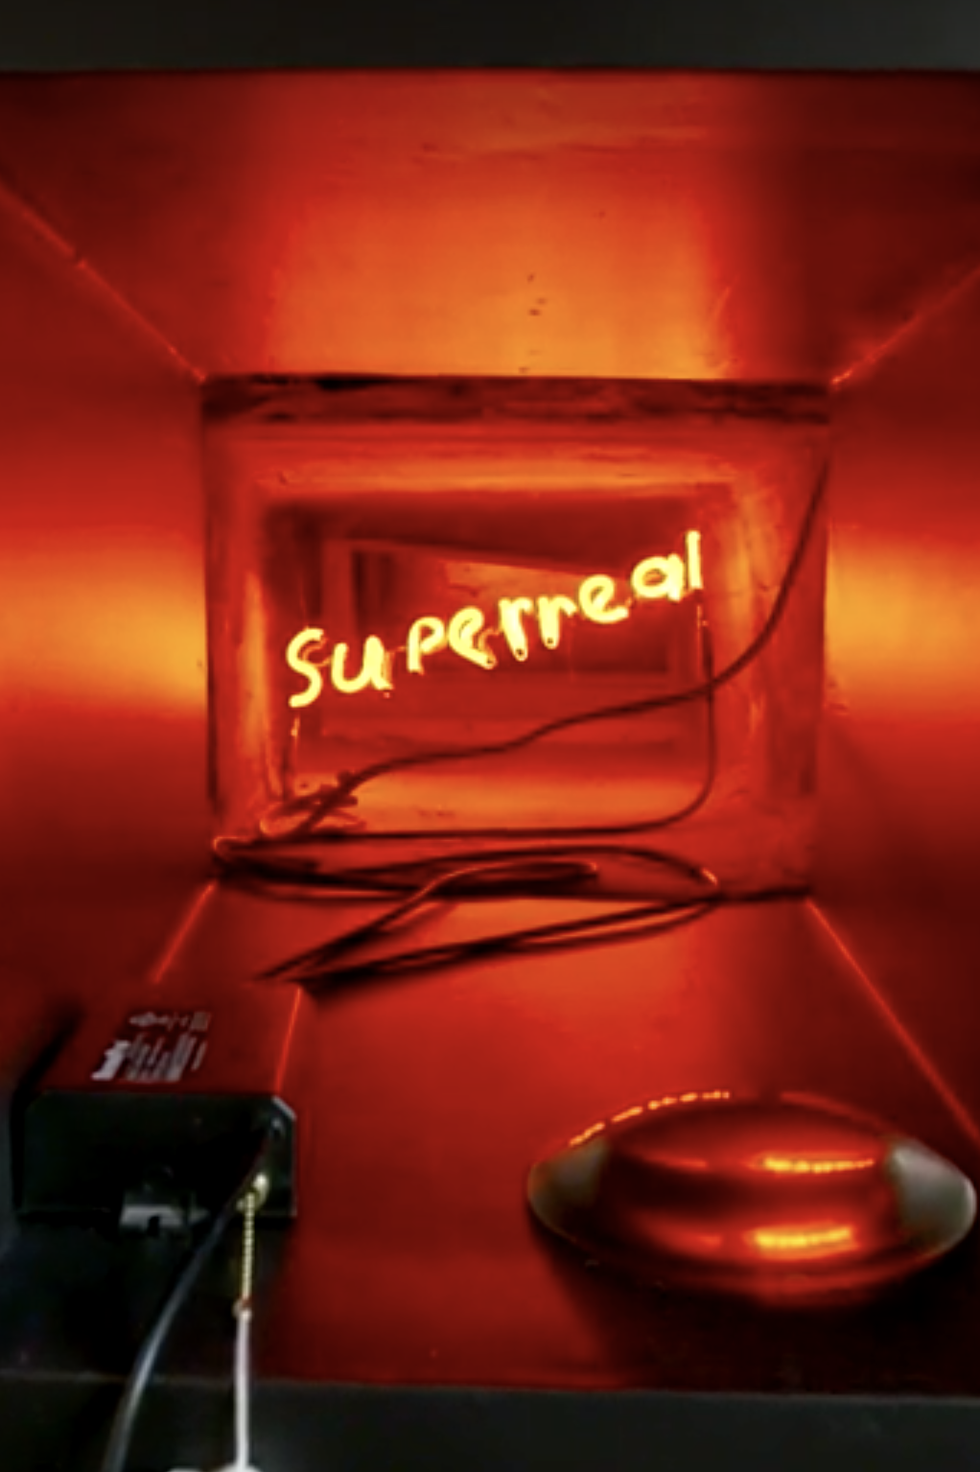 neon art that says "superreal" in a red glow in the woodstock estate﻿